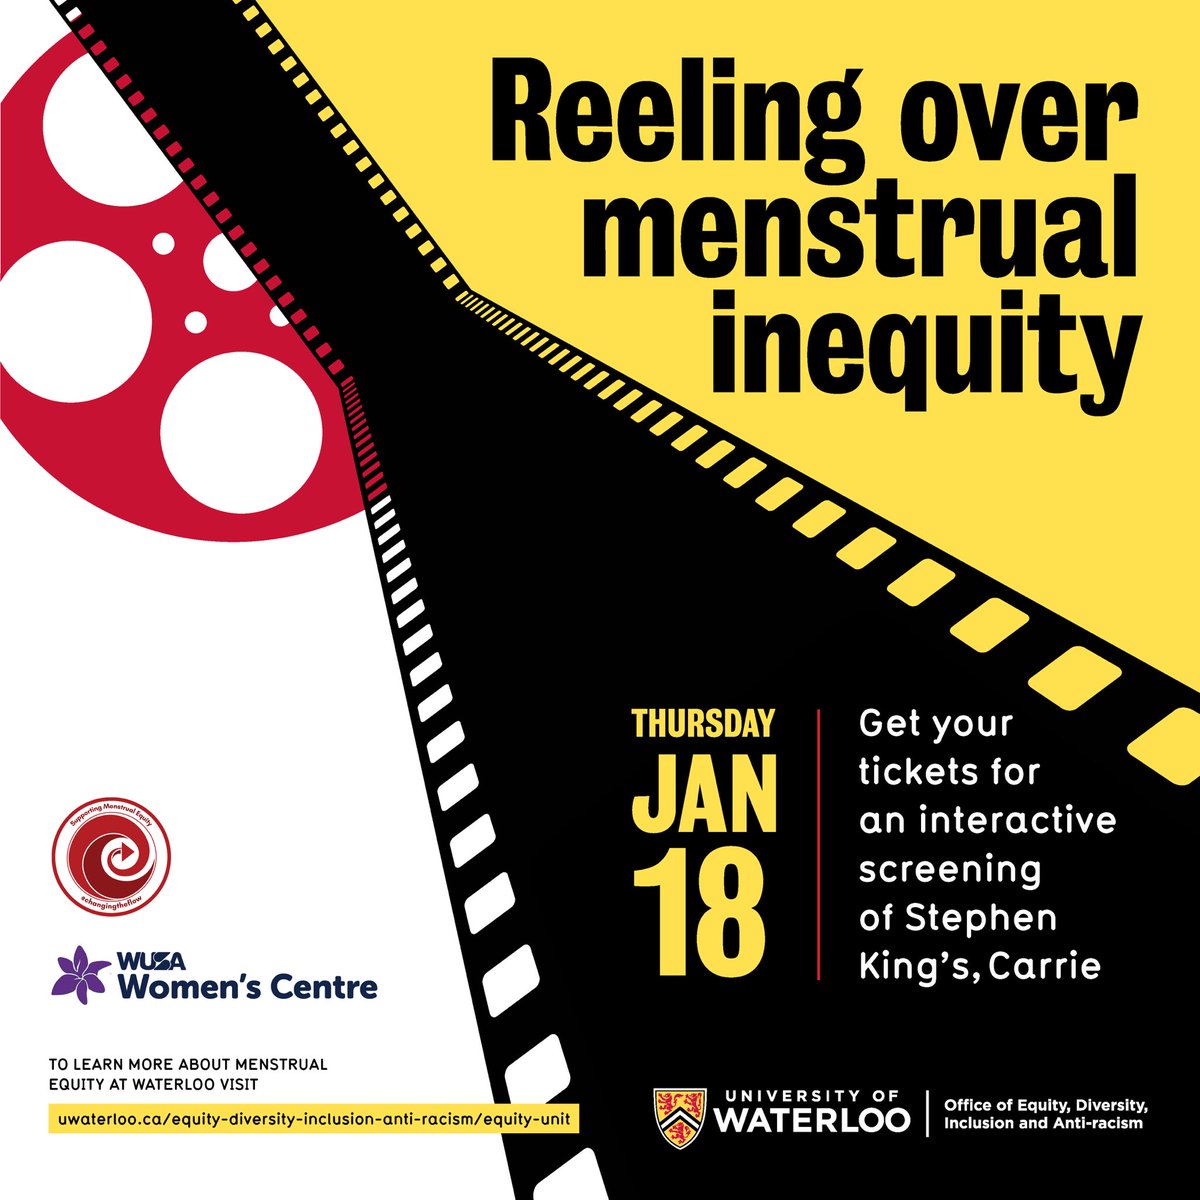 Jan 18th 6-9pm @princesscinemas in #Waterloo 1st 25 people in attendance receive a Changing The Flow prize pack. Tell stigma to shove it as we challenge taboos and expand #MenstrualEquity